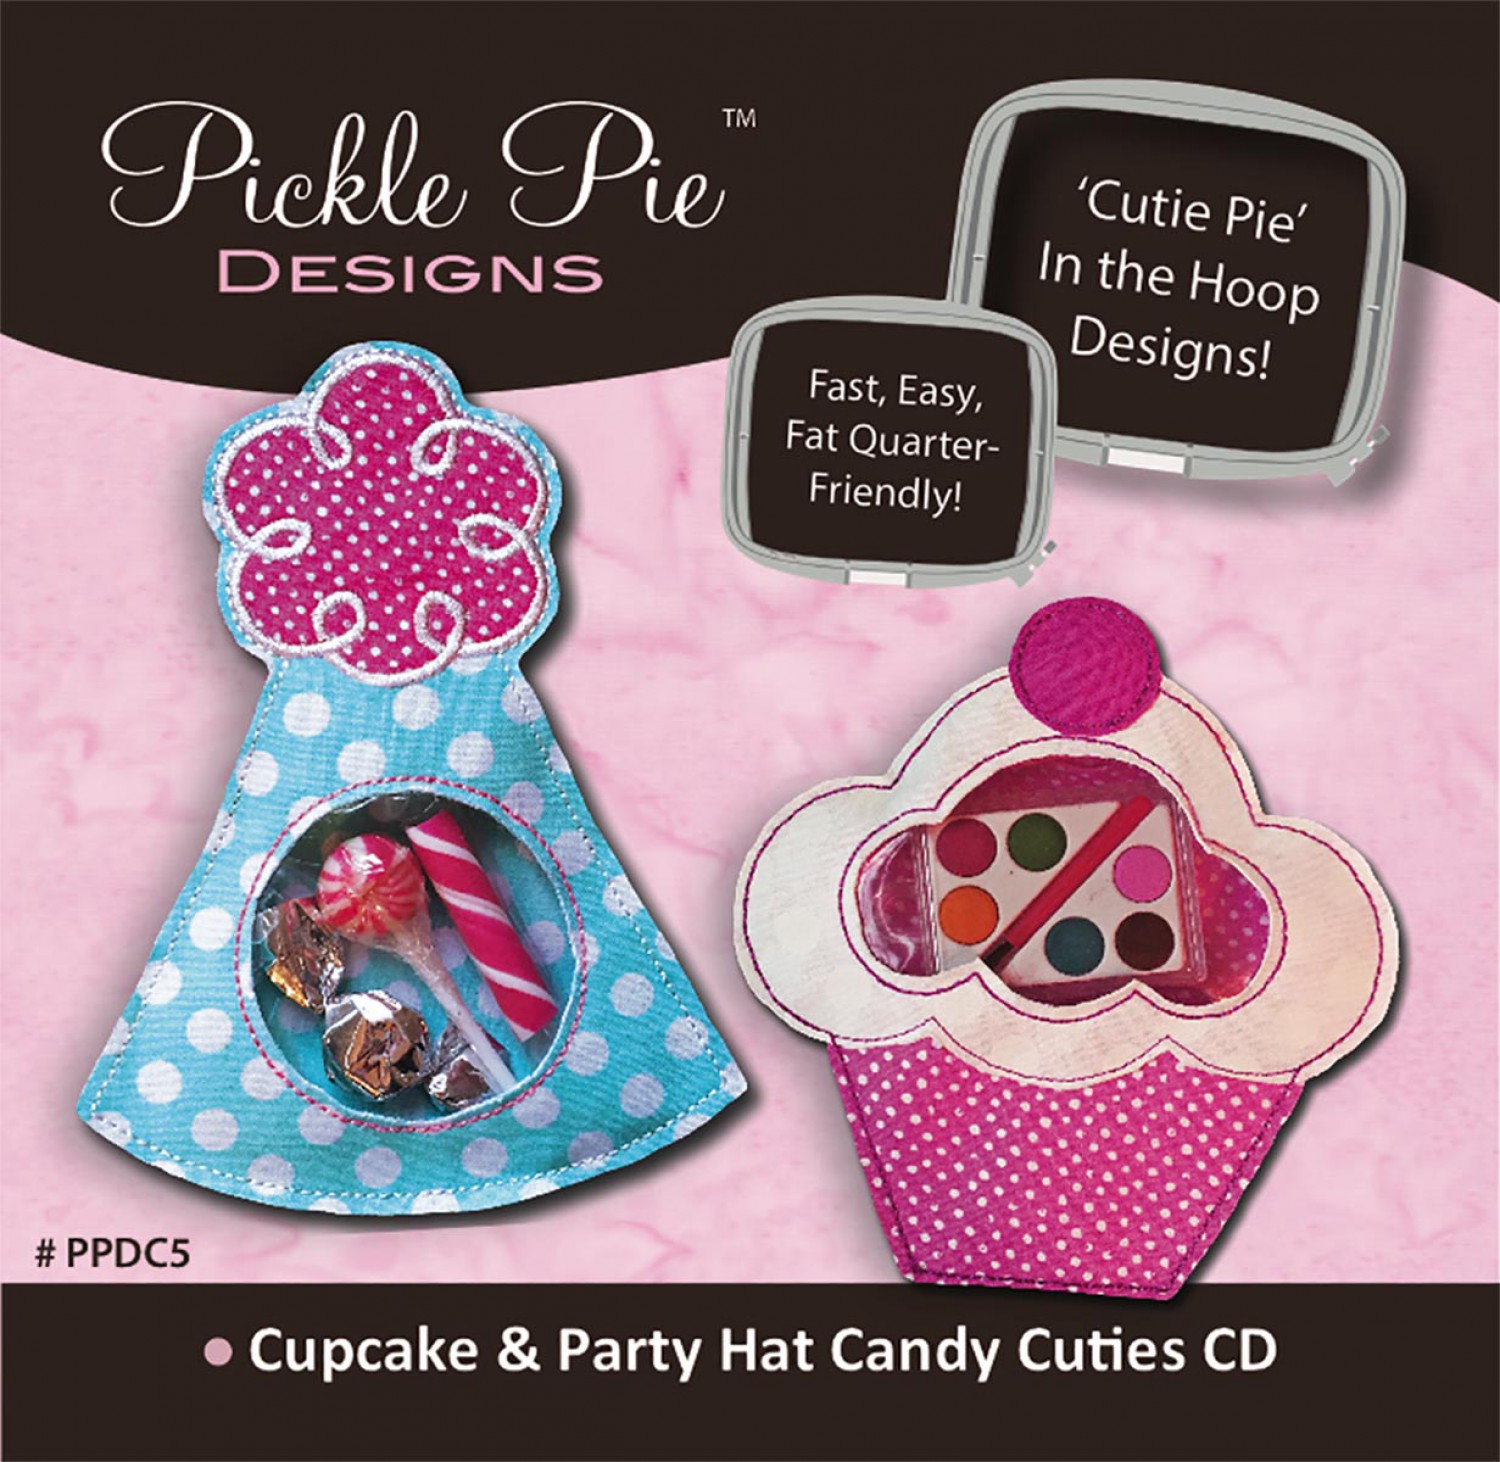 Cupcake & Party Hat Candy Cuties Collection Embroidery Designs on CD-ROM by Pickle Pie Designs